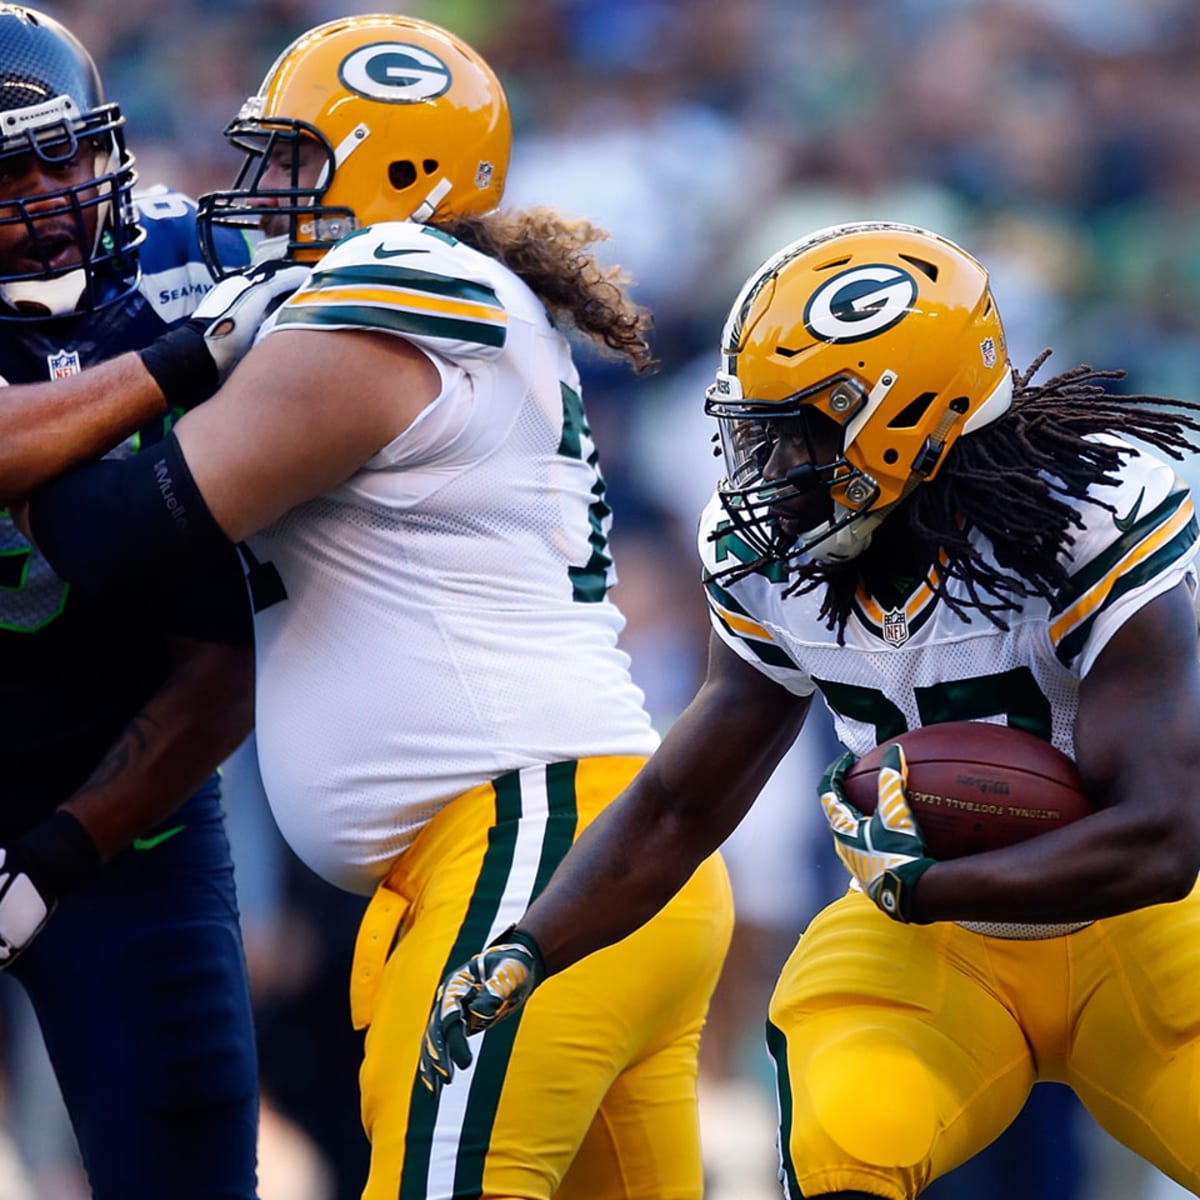 Eddie Lacy's NFL Career Was Short-Lived, But Where is He Now